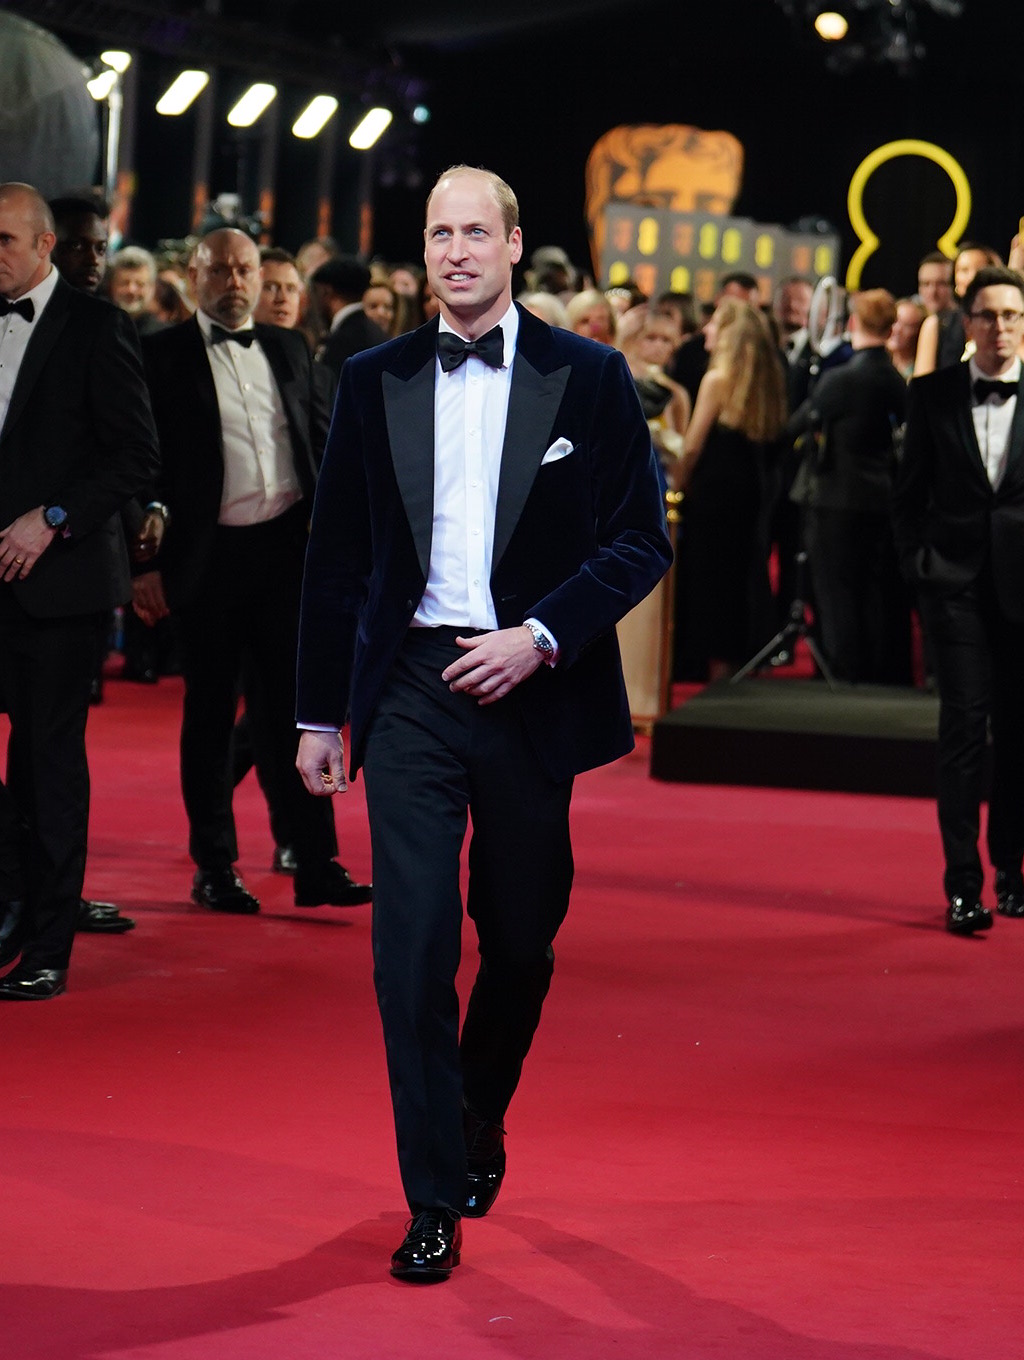 Prince William in a black suit on the red carpet